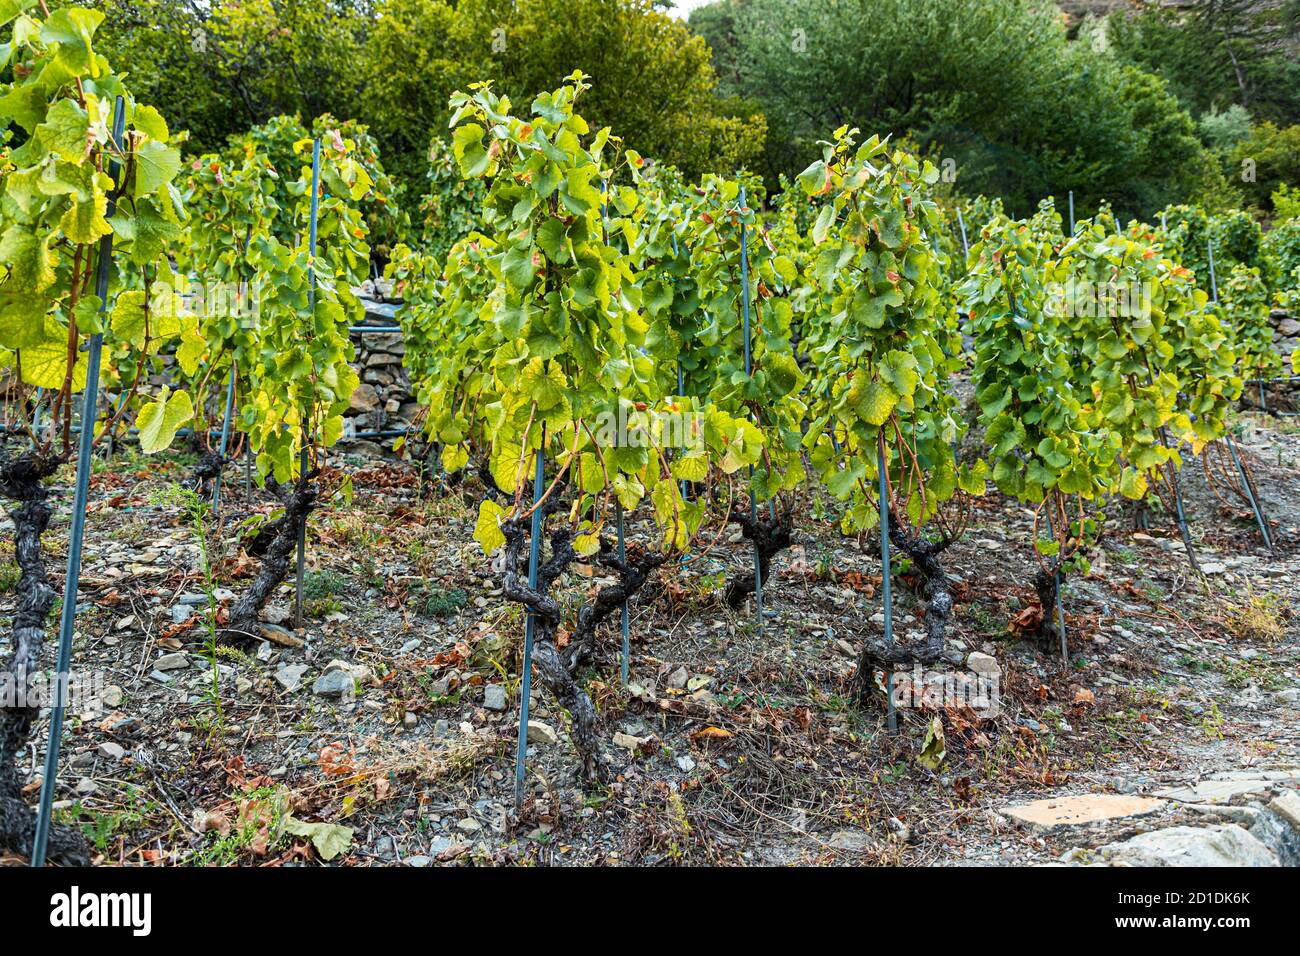 Visperterminen's highest vineyard of Europe Visp, Switzerland. The vines of the Heida, which are true to their roots, even withstood the phylloxera plague in the last century. Stock Photo